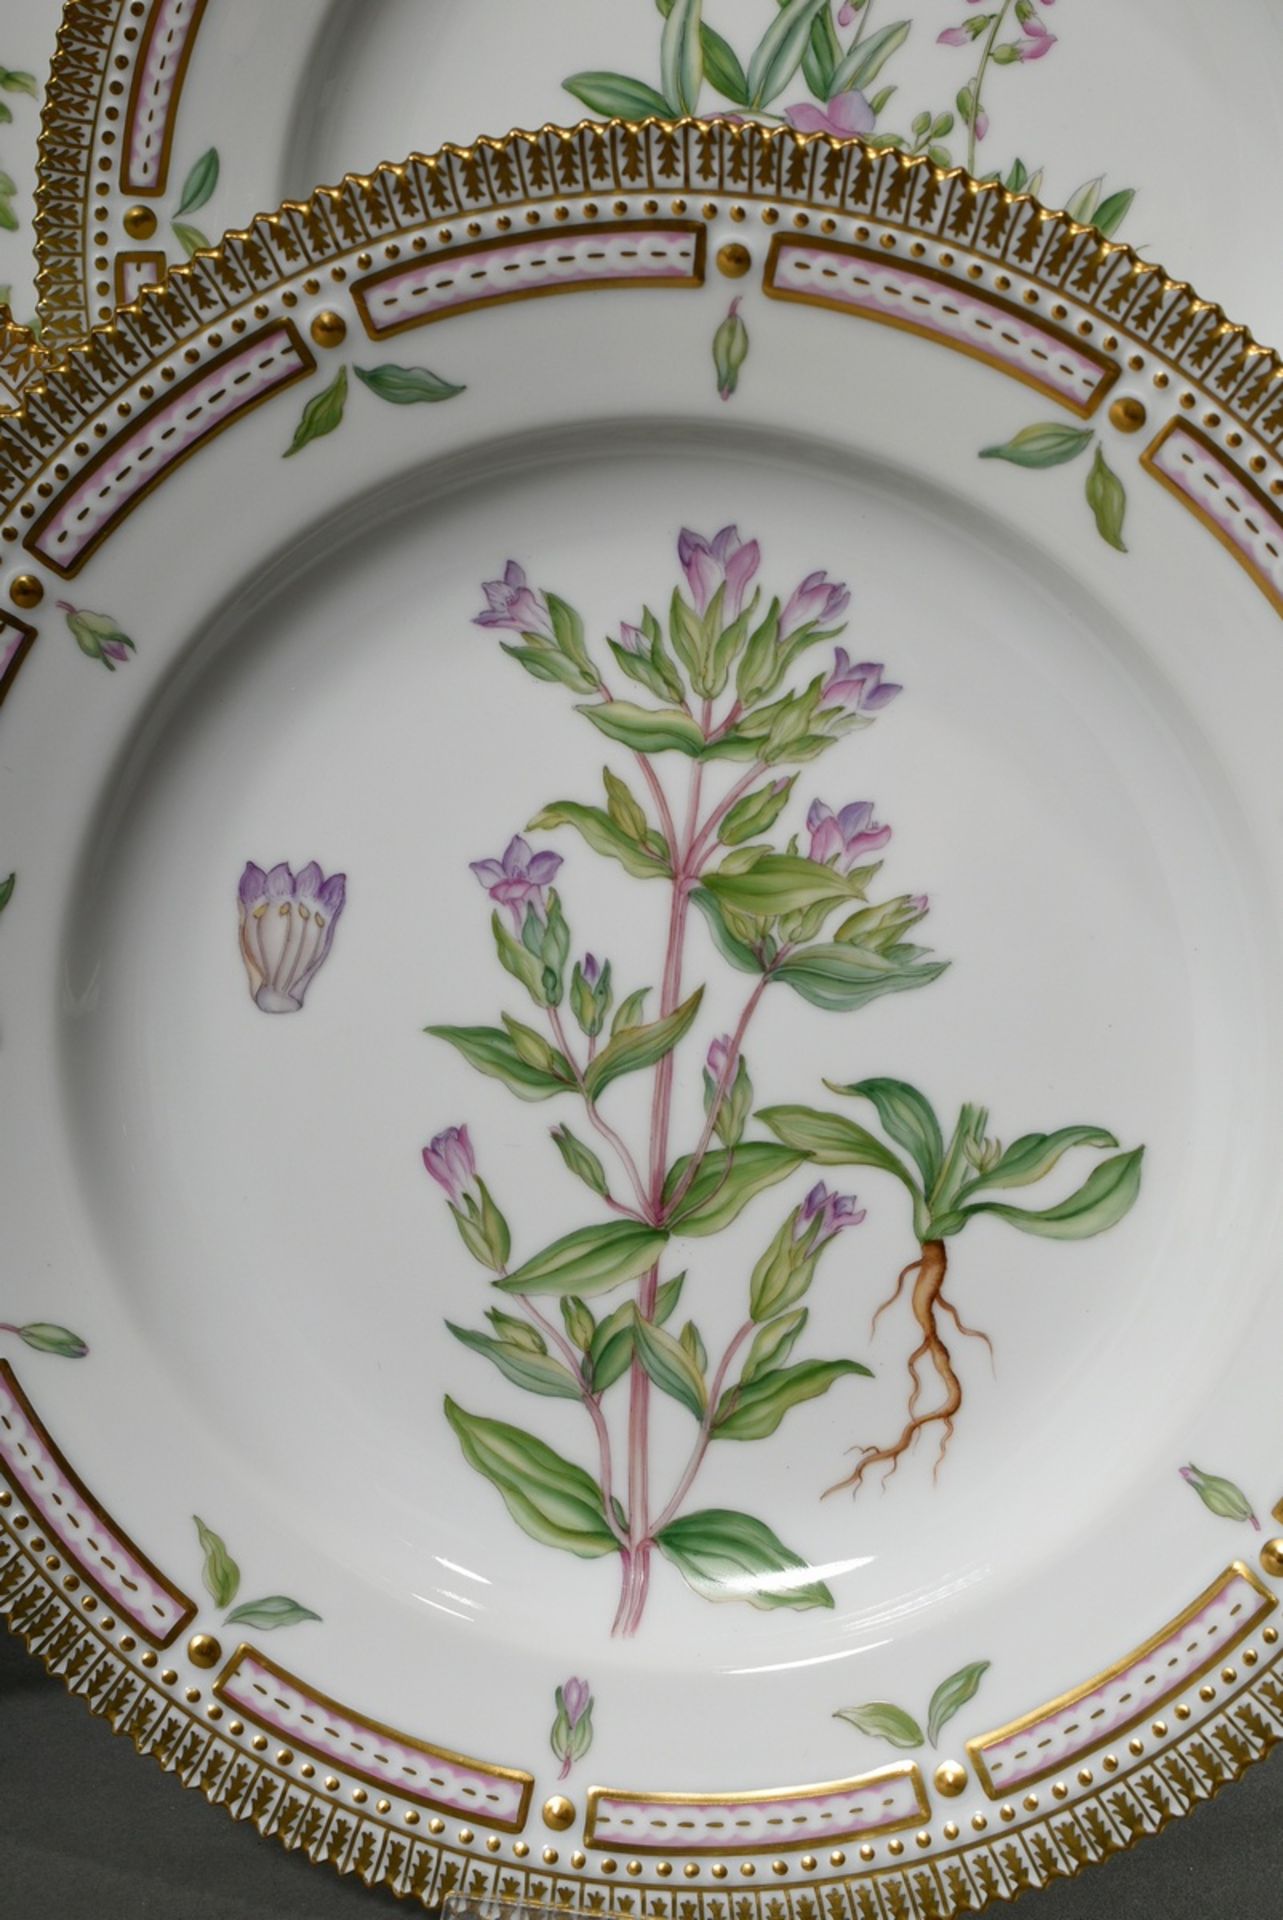 6 Royal Copenhagen "Flora Danica" dinner plates with polychrome painting in the mirror and gold dec - Image 4 of 15